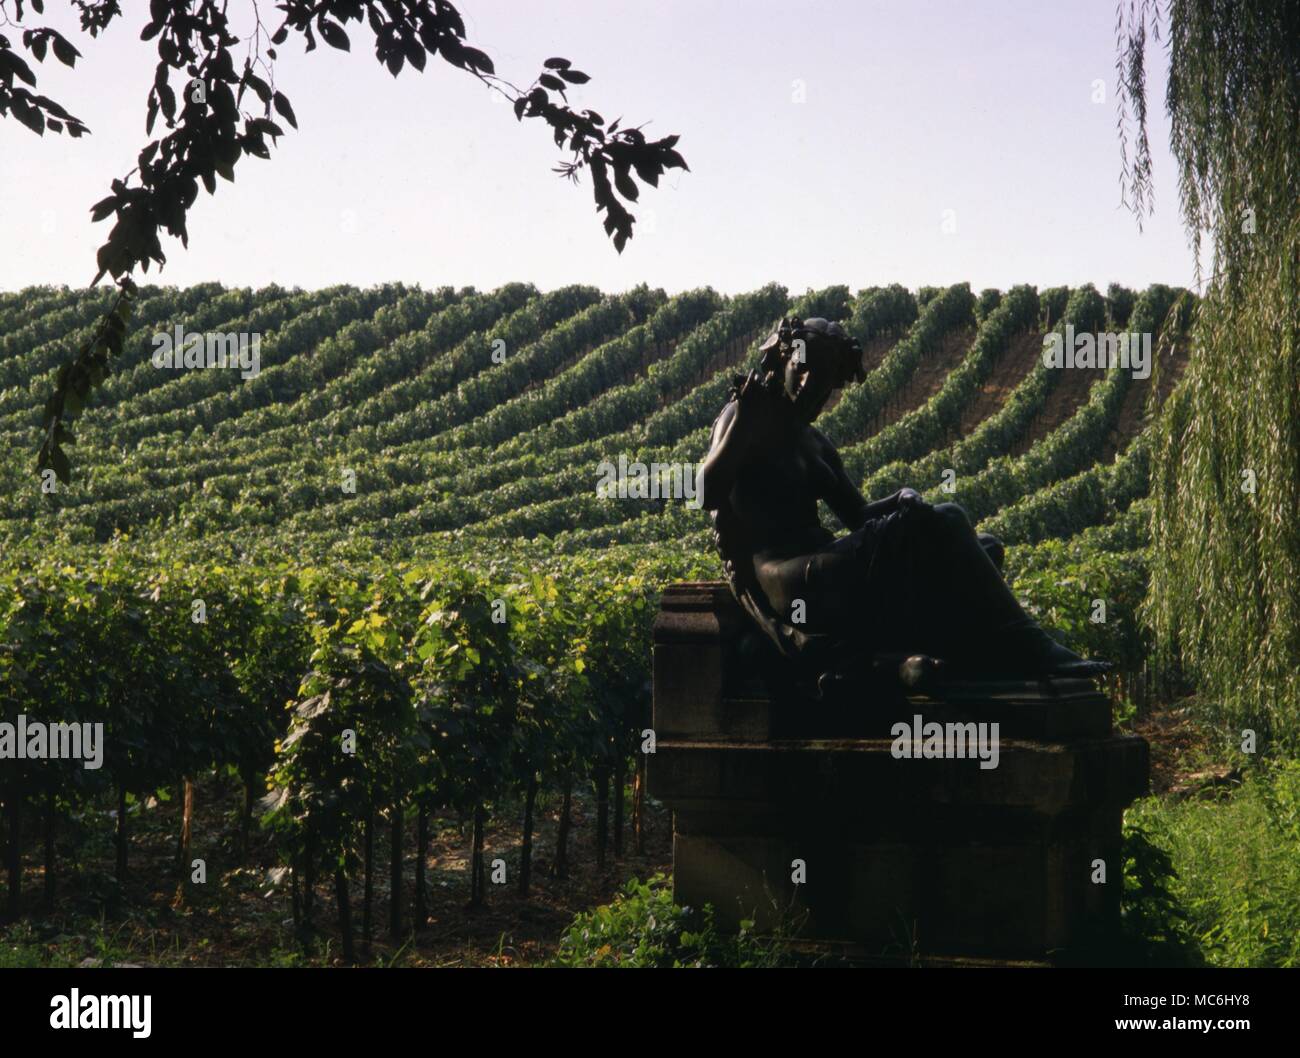 Seasons Spring Personification of Spring in the vineyards of Chateau de la Riviere Fronsac region of Boredeaux Stock Photo